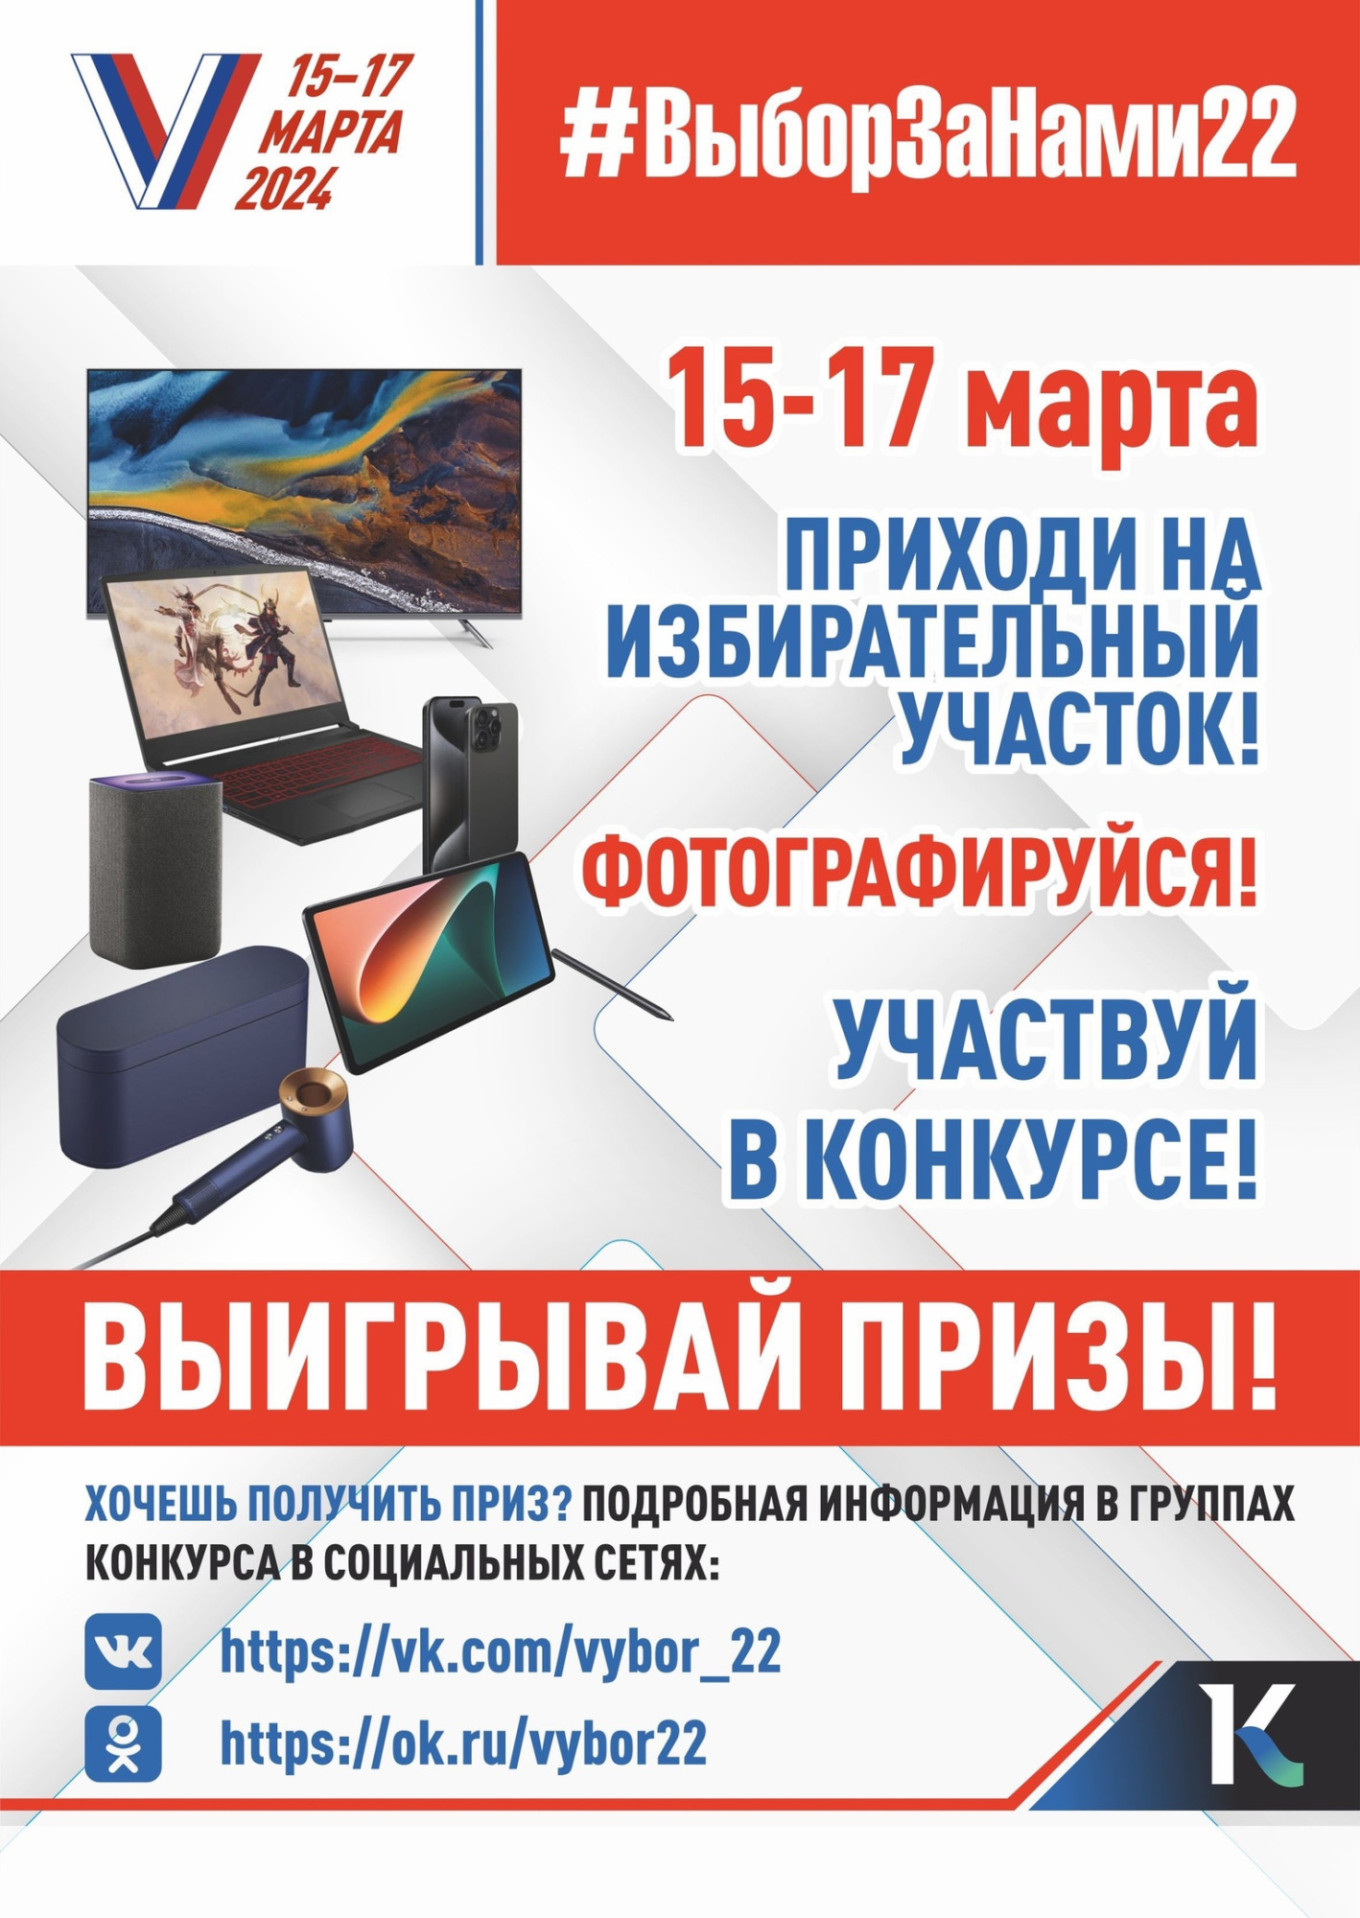 
					Promo poster for the election raffle in Altai 					 					vk.com/vybor_22				